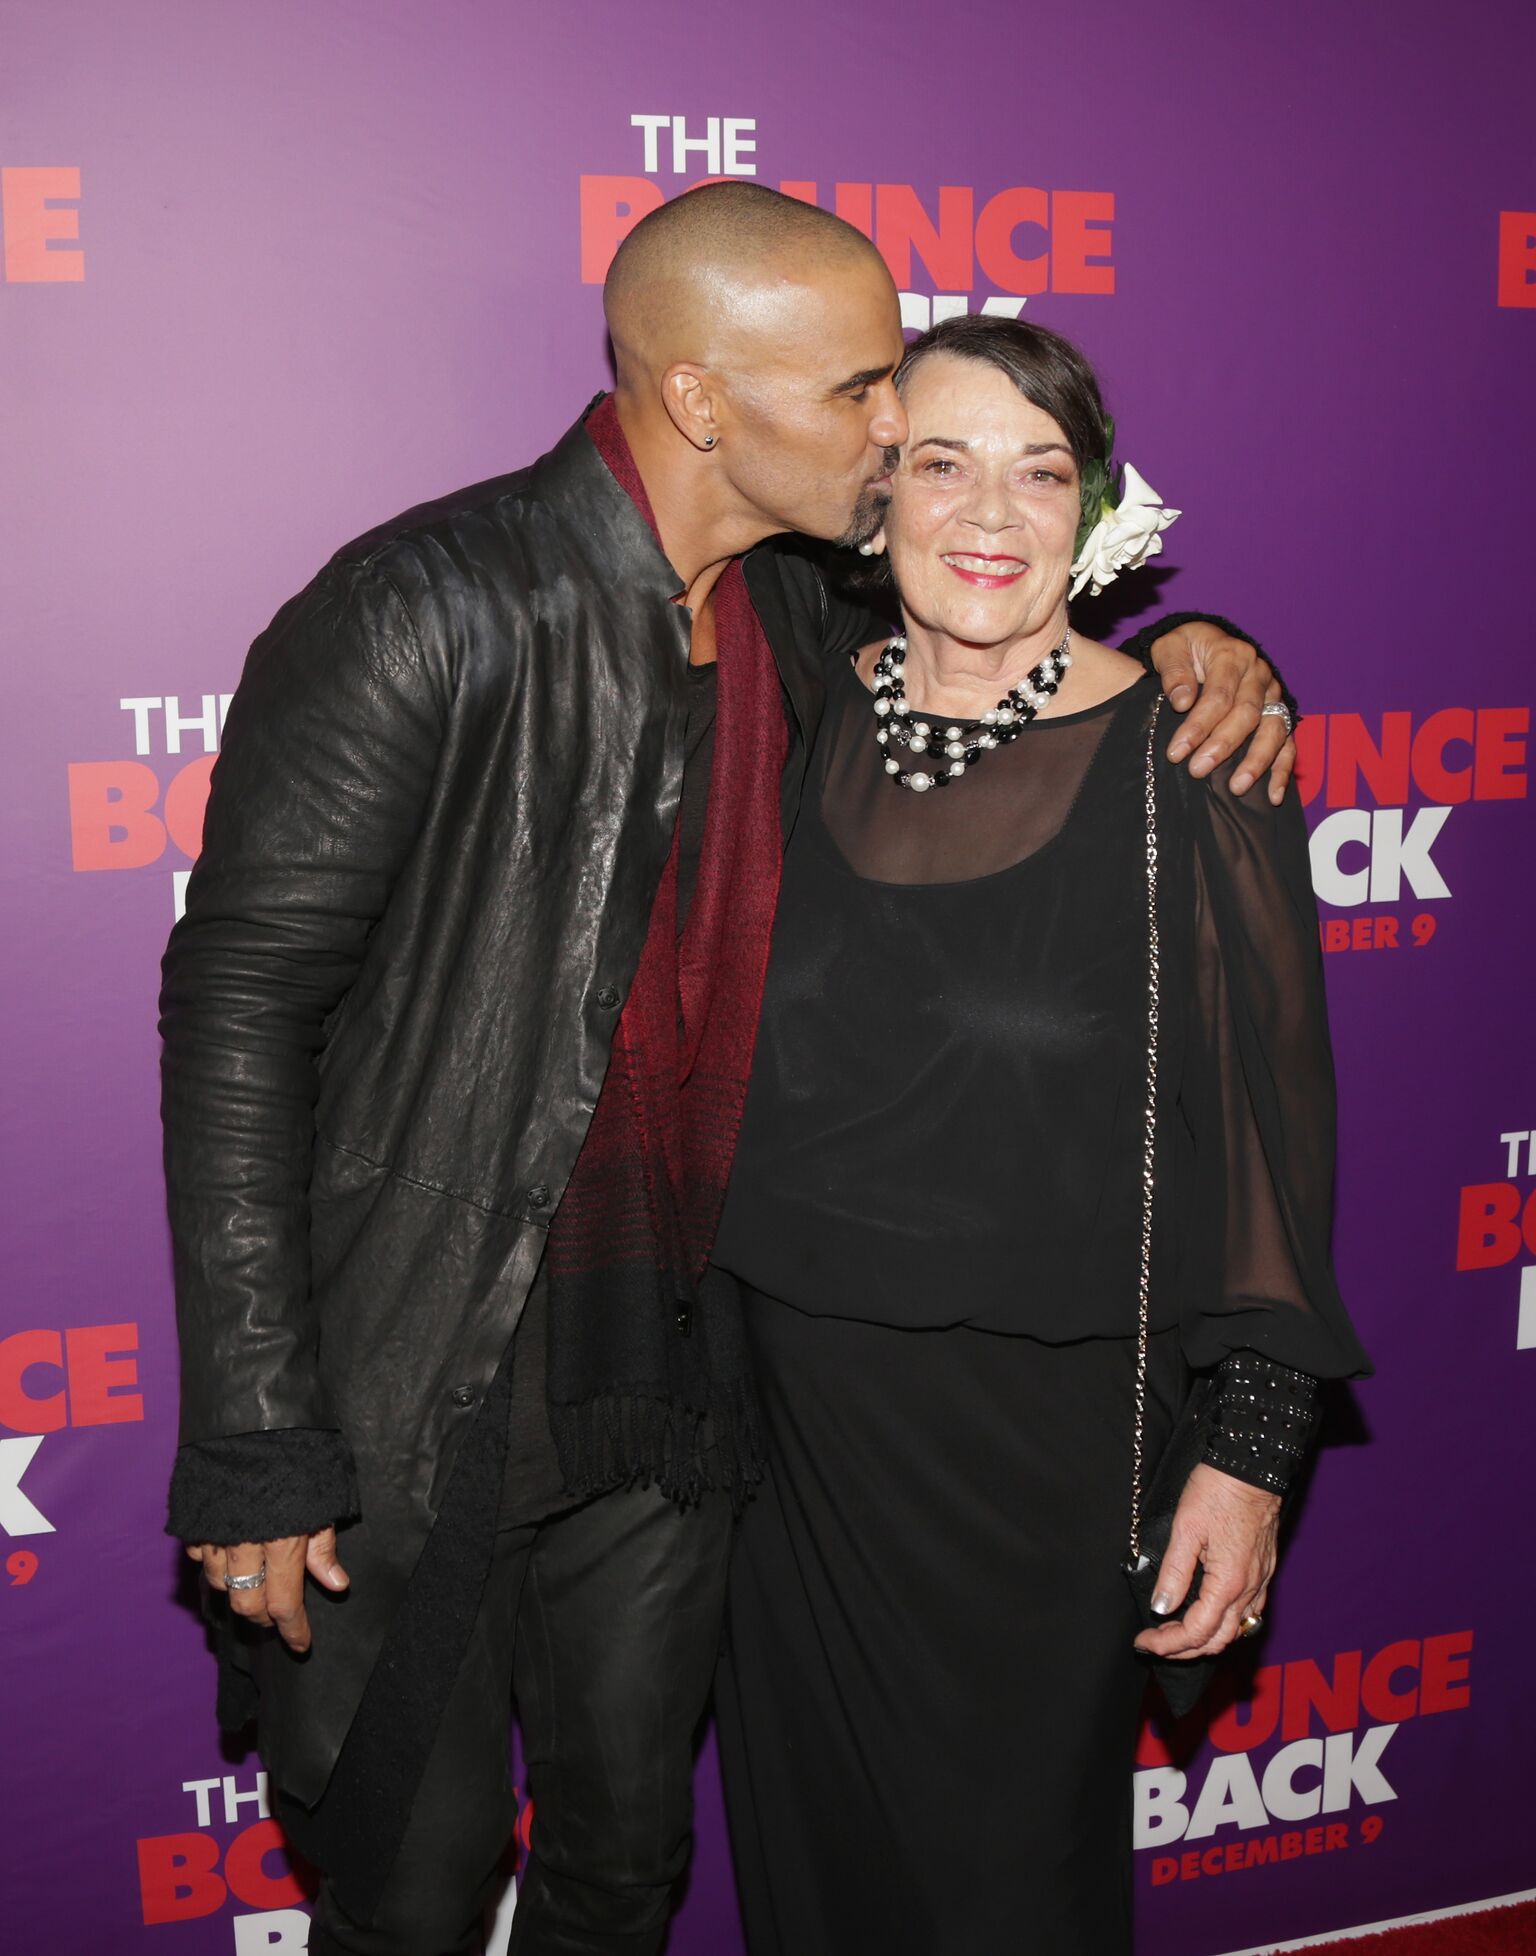 Shemar Moore poses with his mother Marilyn Wilson at the Premiere Of "The Bounce Back" | Getty Images / Global Image Ukraine